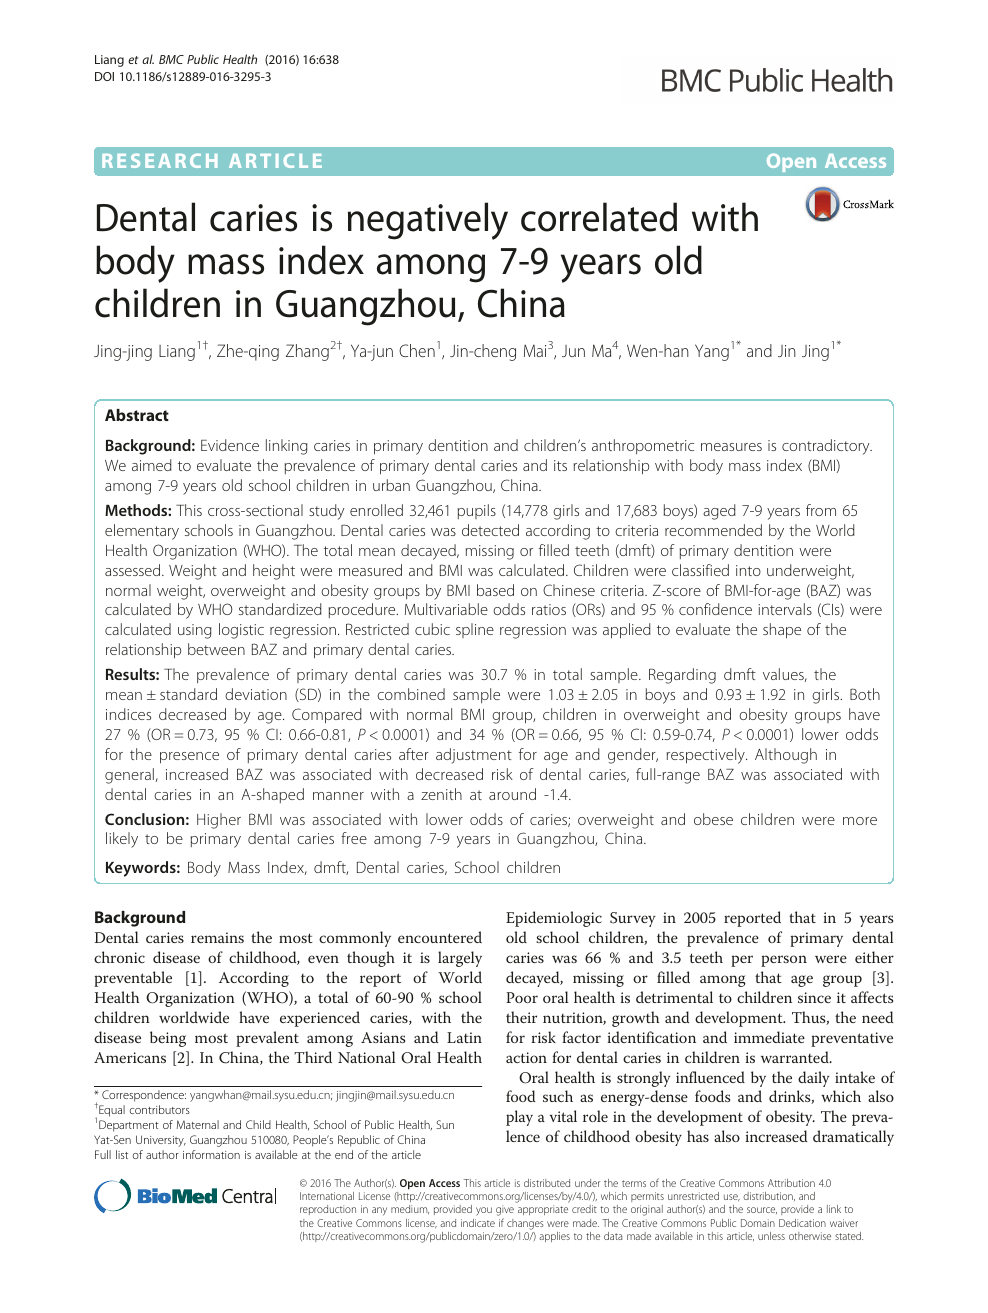 Dental Caries Is Negatively Correlated With Body Mass Index Among 7 9 Years Old Children In Guangzhou China Topic Of Research Paper In Health Sciences Download Scholarly Article Pdf And Read For